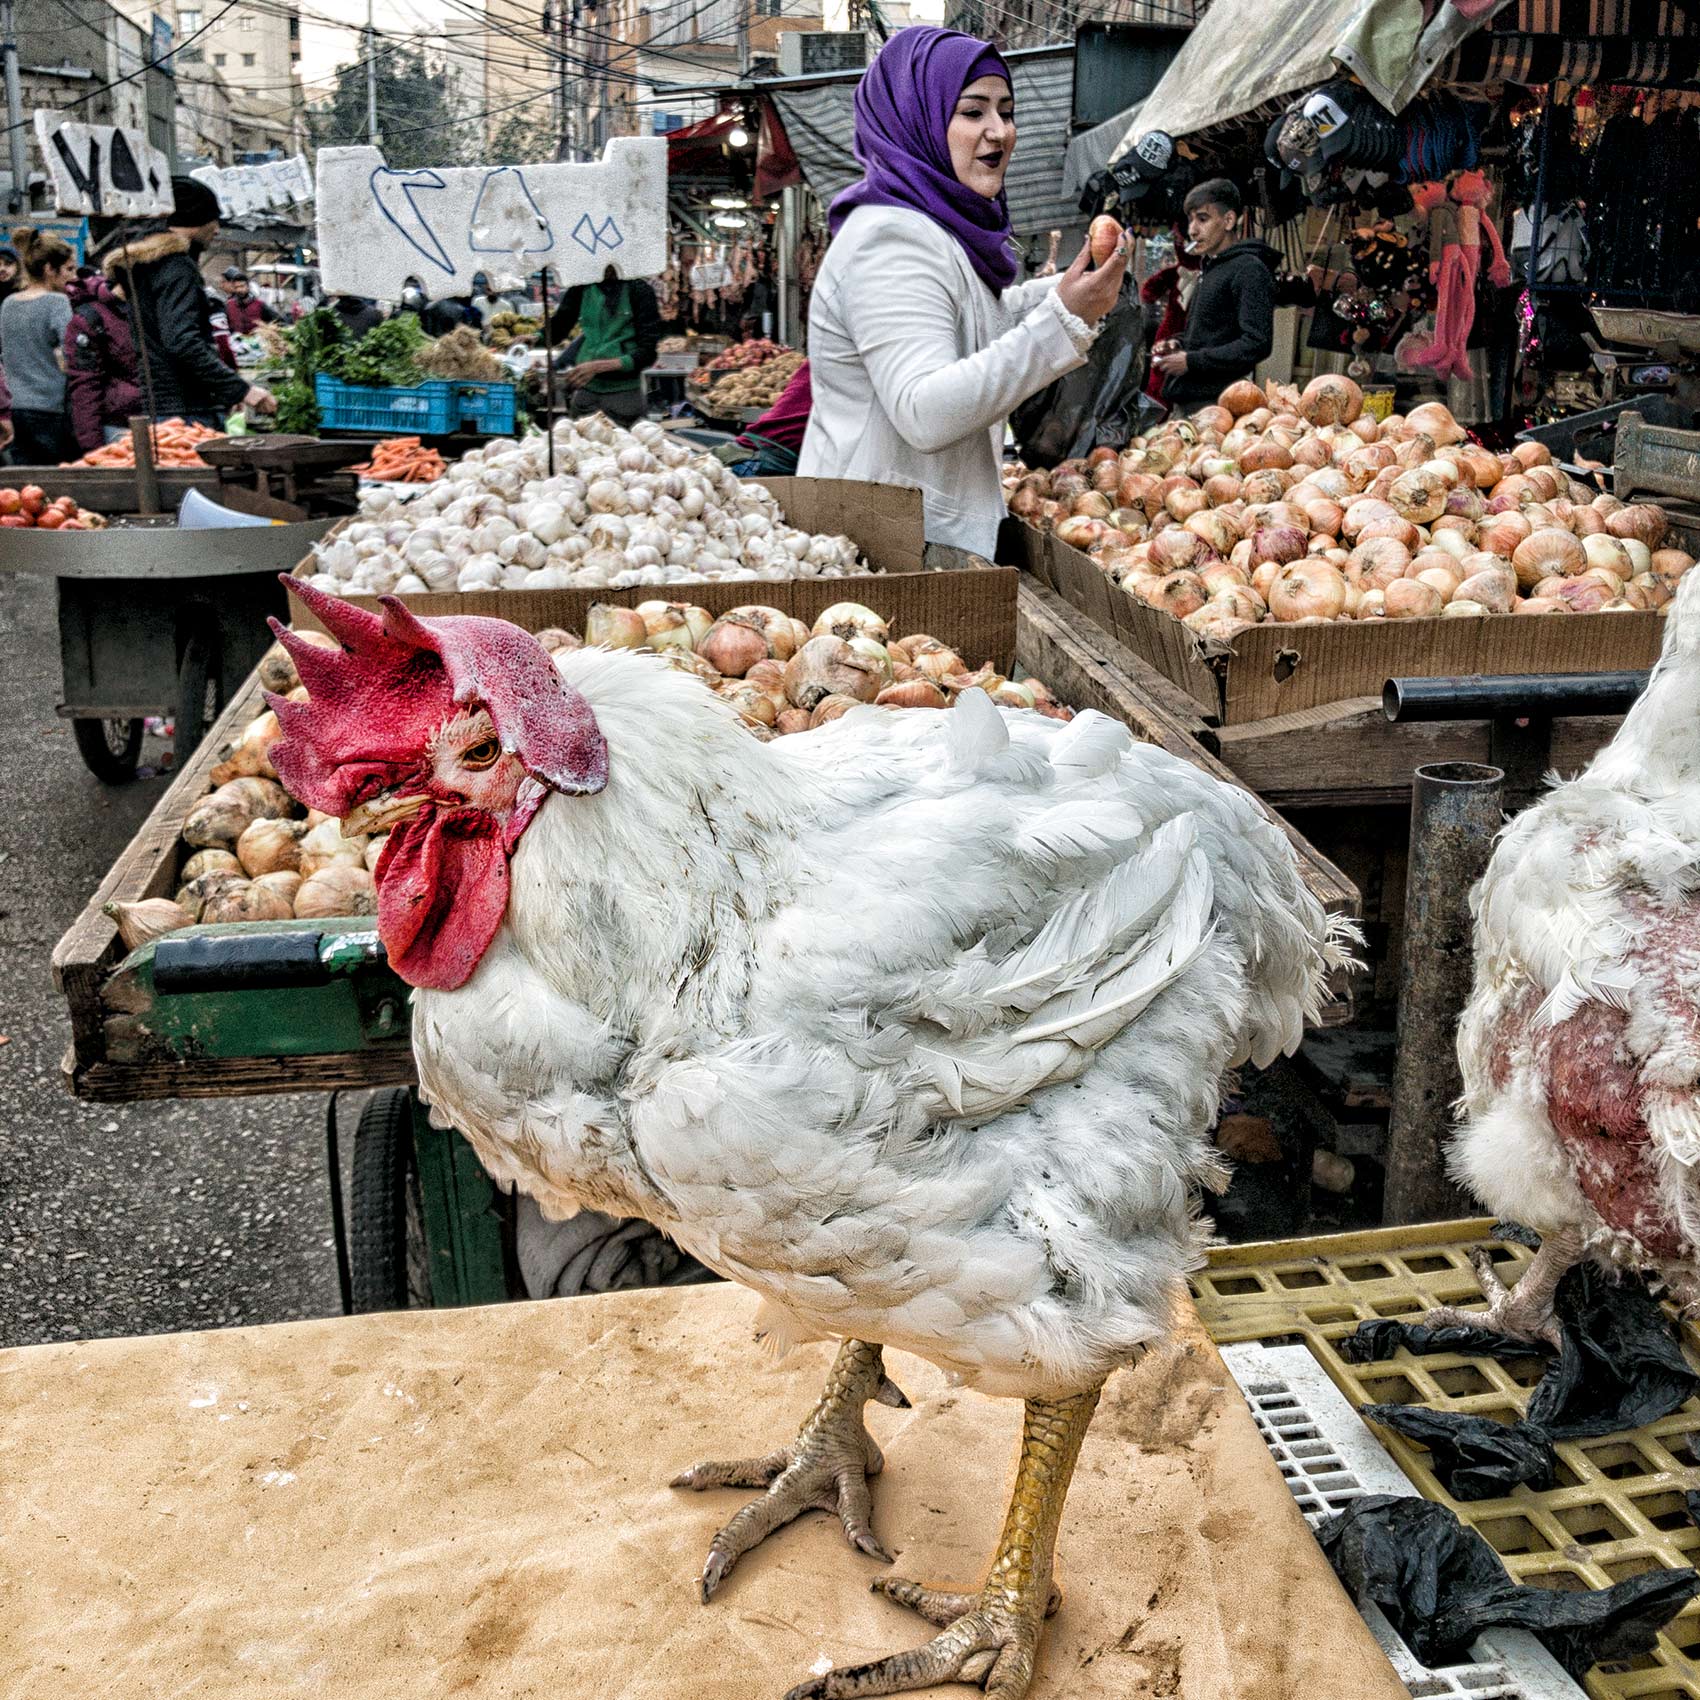 a-woman-checks-an-onion-at-a-market-in-west-beirut-as-a-chicken-stands-in-the-foreground